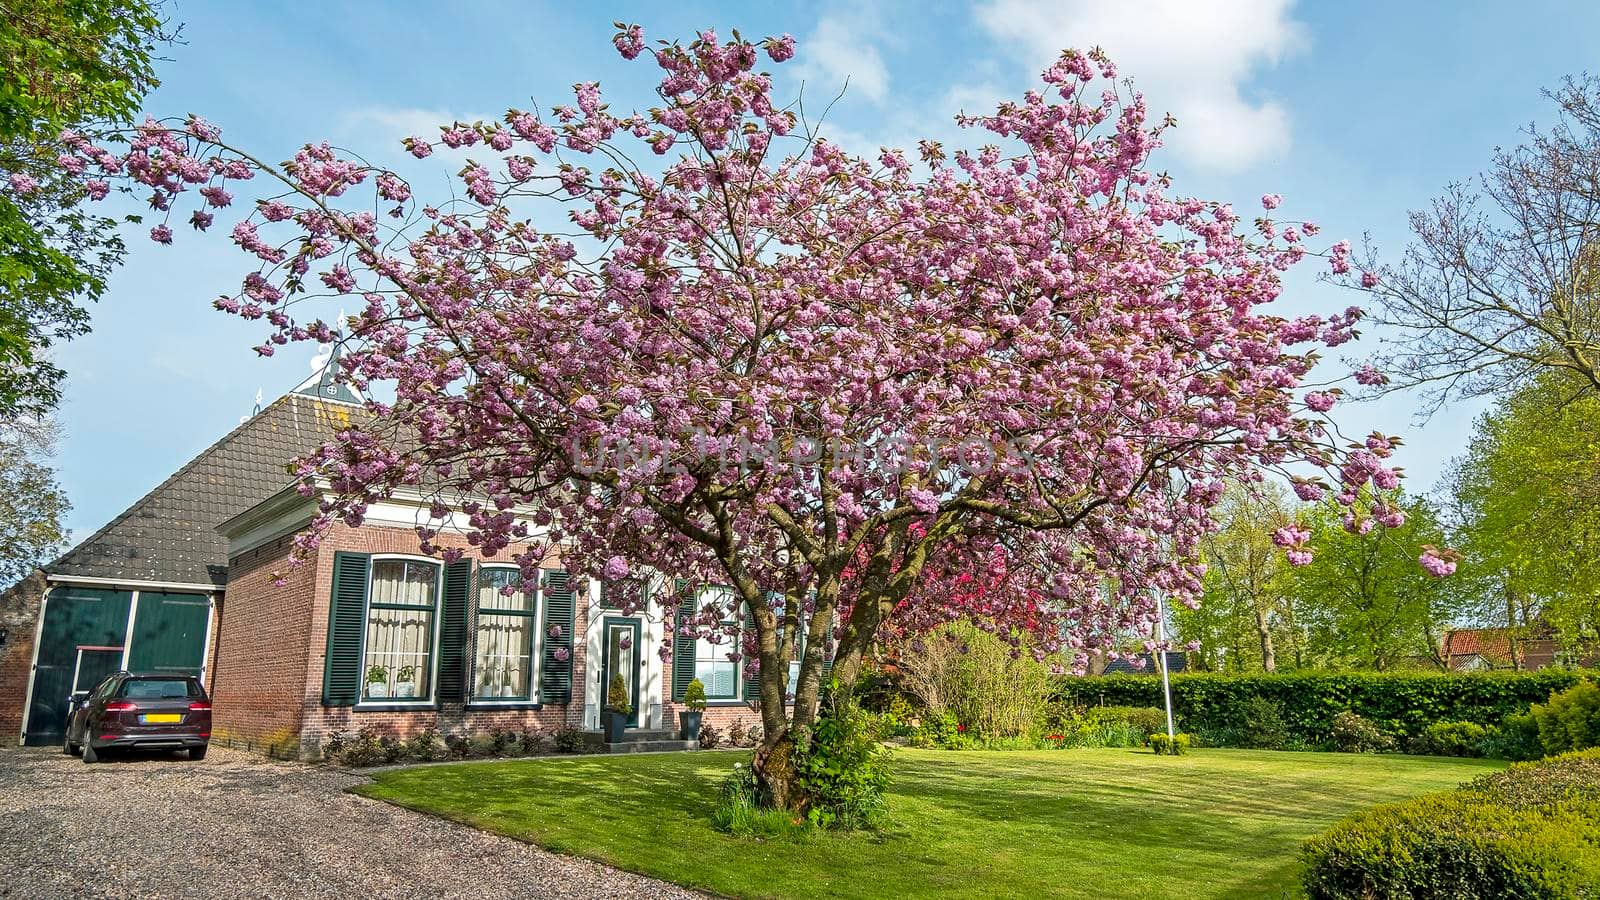 Blossoming cherry tree and a medieval country house in the Netherlands by devy